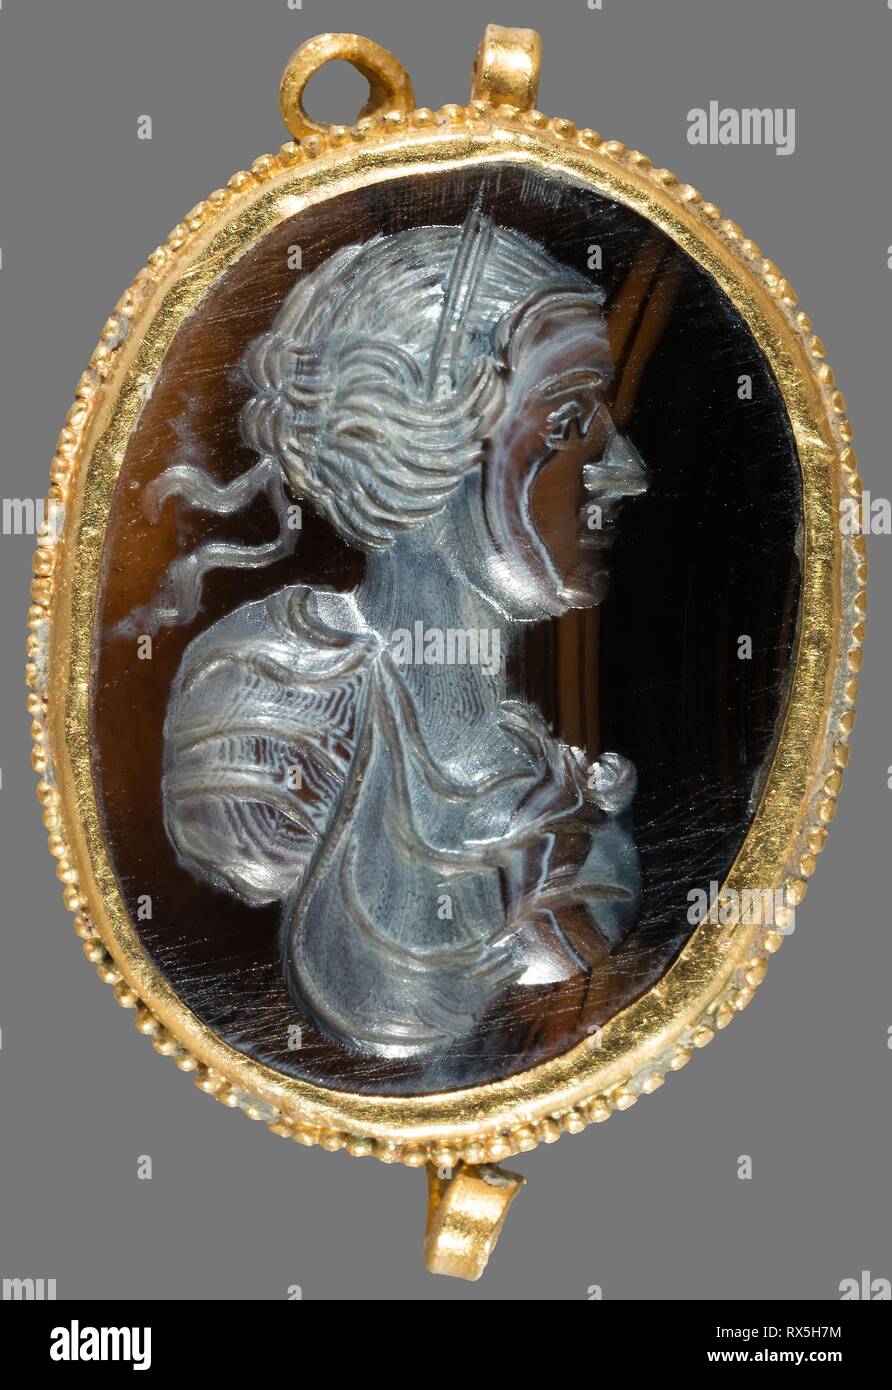 Pendant with an Intaglio of the Head of a Woman. European. Date: 1500-1599. Dimensions: 2.6 × 2.1 cm (1 1/16 × 7/8 in.). Gold and hardstone. Origin: Europe. Museum: The Chicago Art Institute. Stock Photo